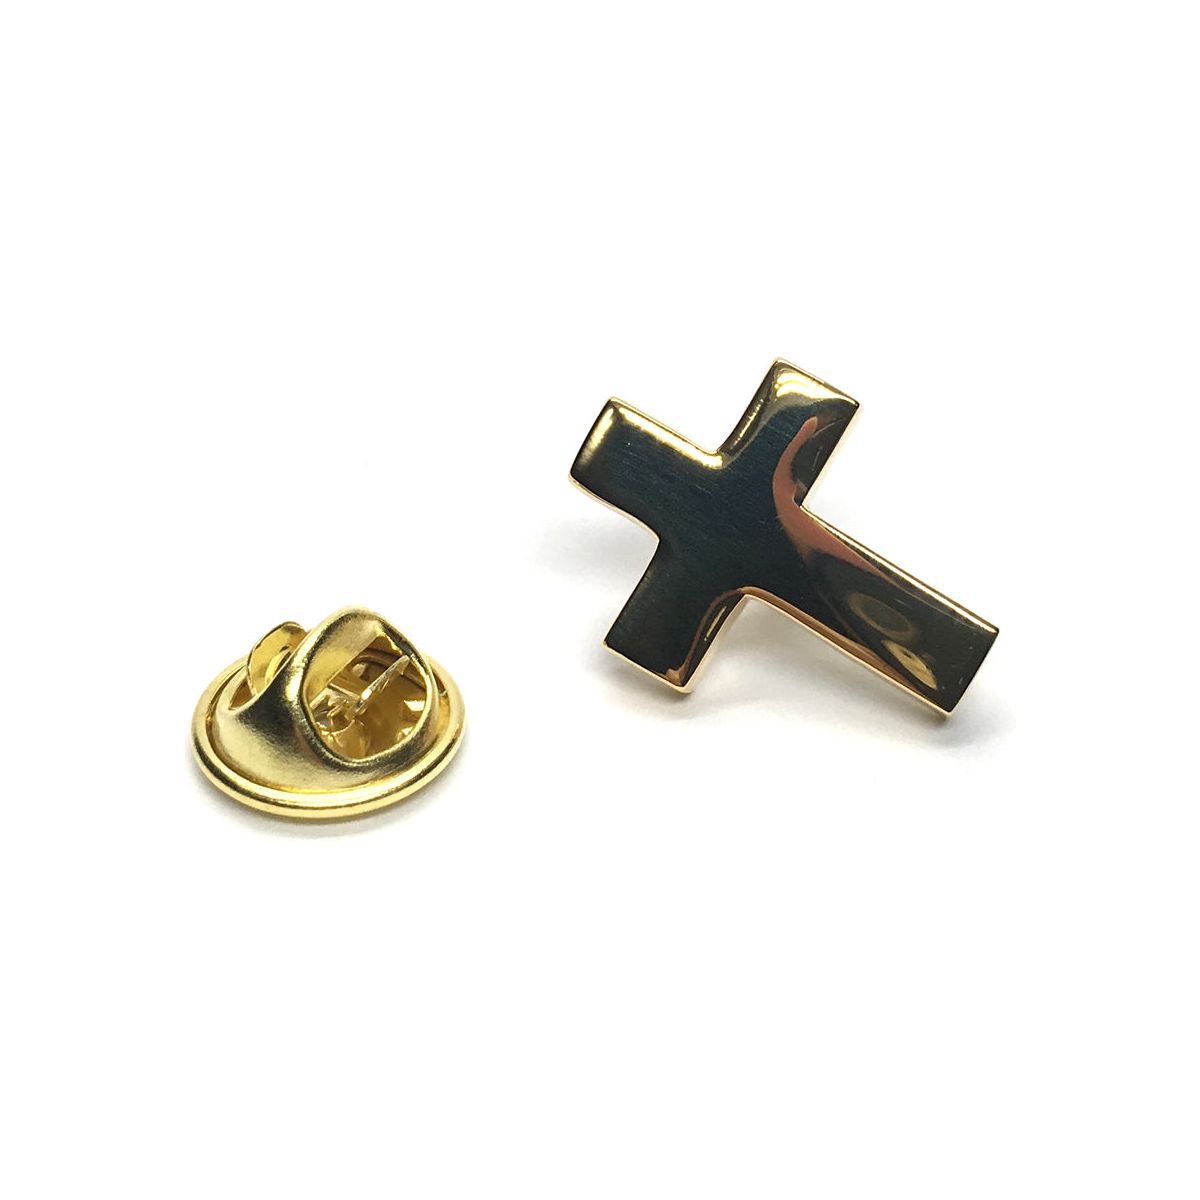 Gold Plated Christian Cross Lapel Pin Badge - Ashton and Finch